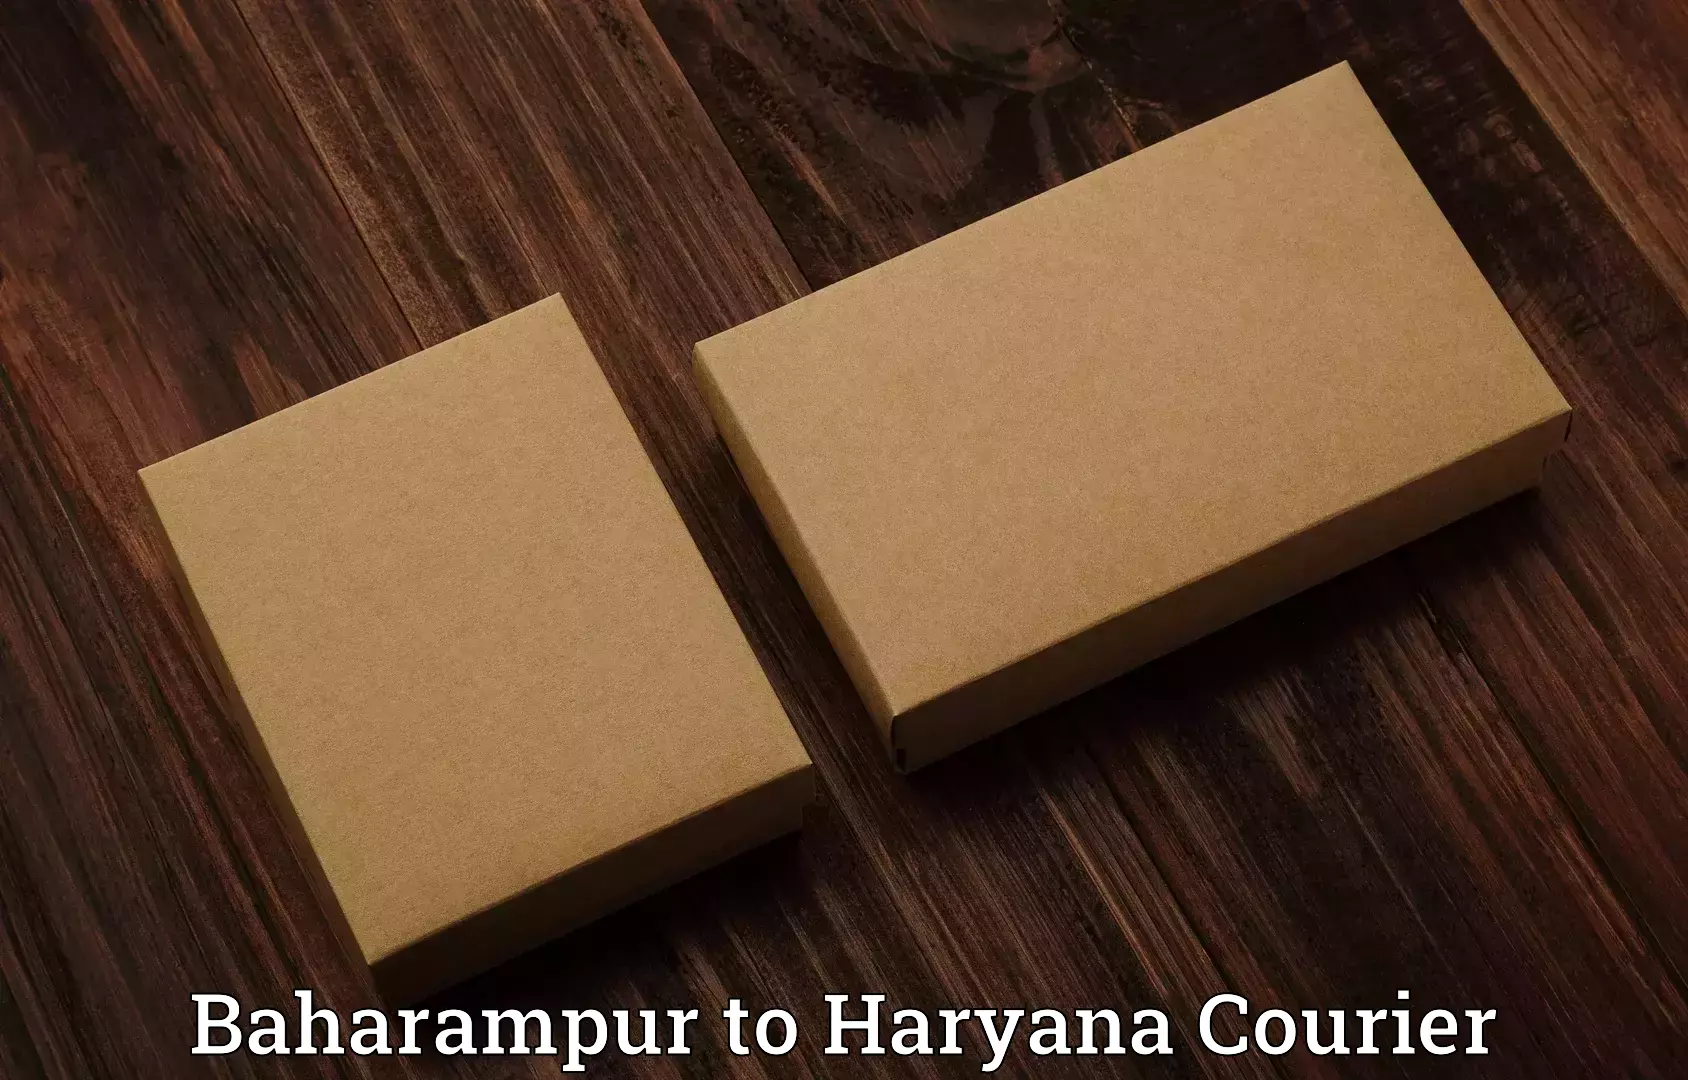 Personal effects shipping in Baharampur to Barwala